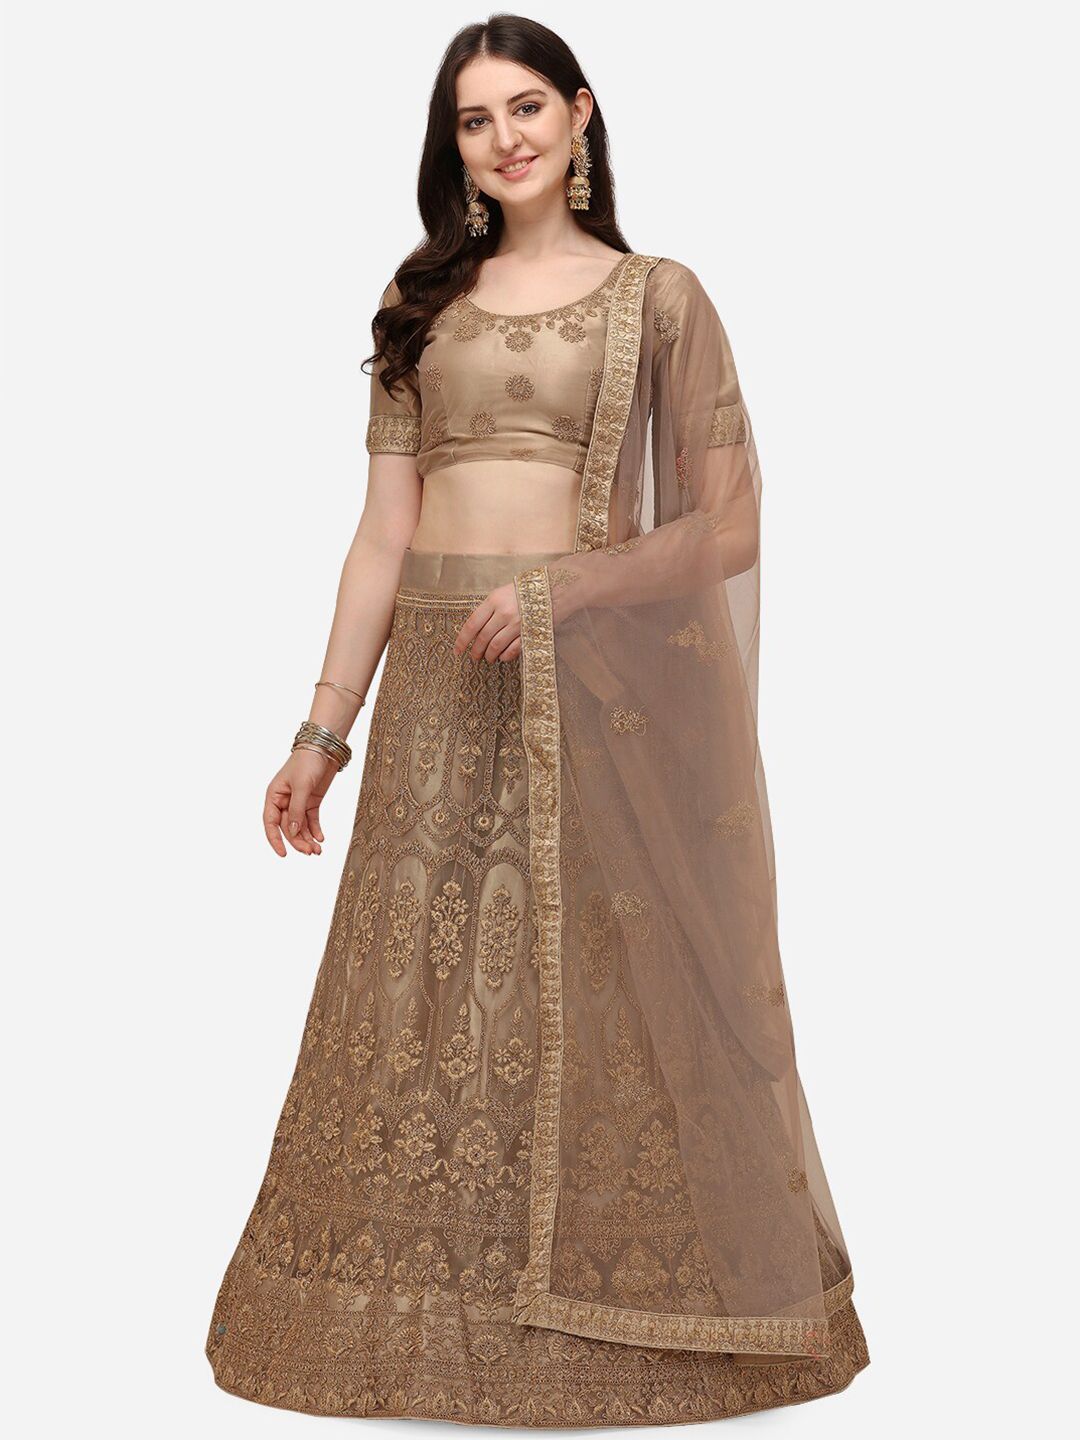 V SALES Beige Embroidered Thread Work Semi-Stitched Lehenga & Unstitched Blouse With Dupatta Price in India